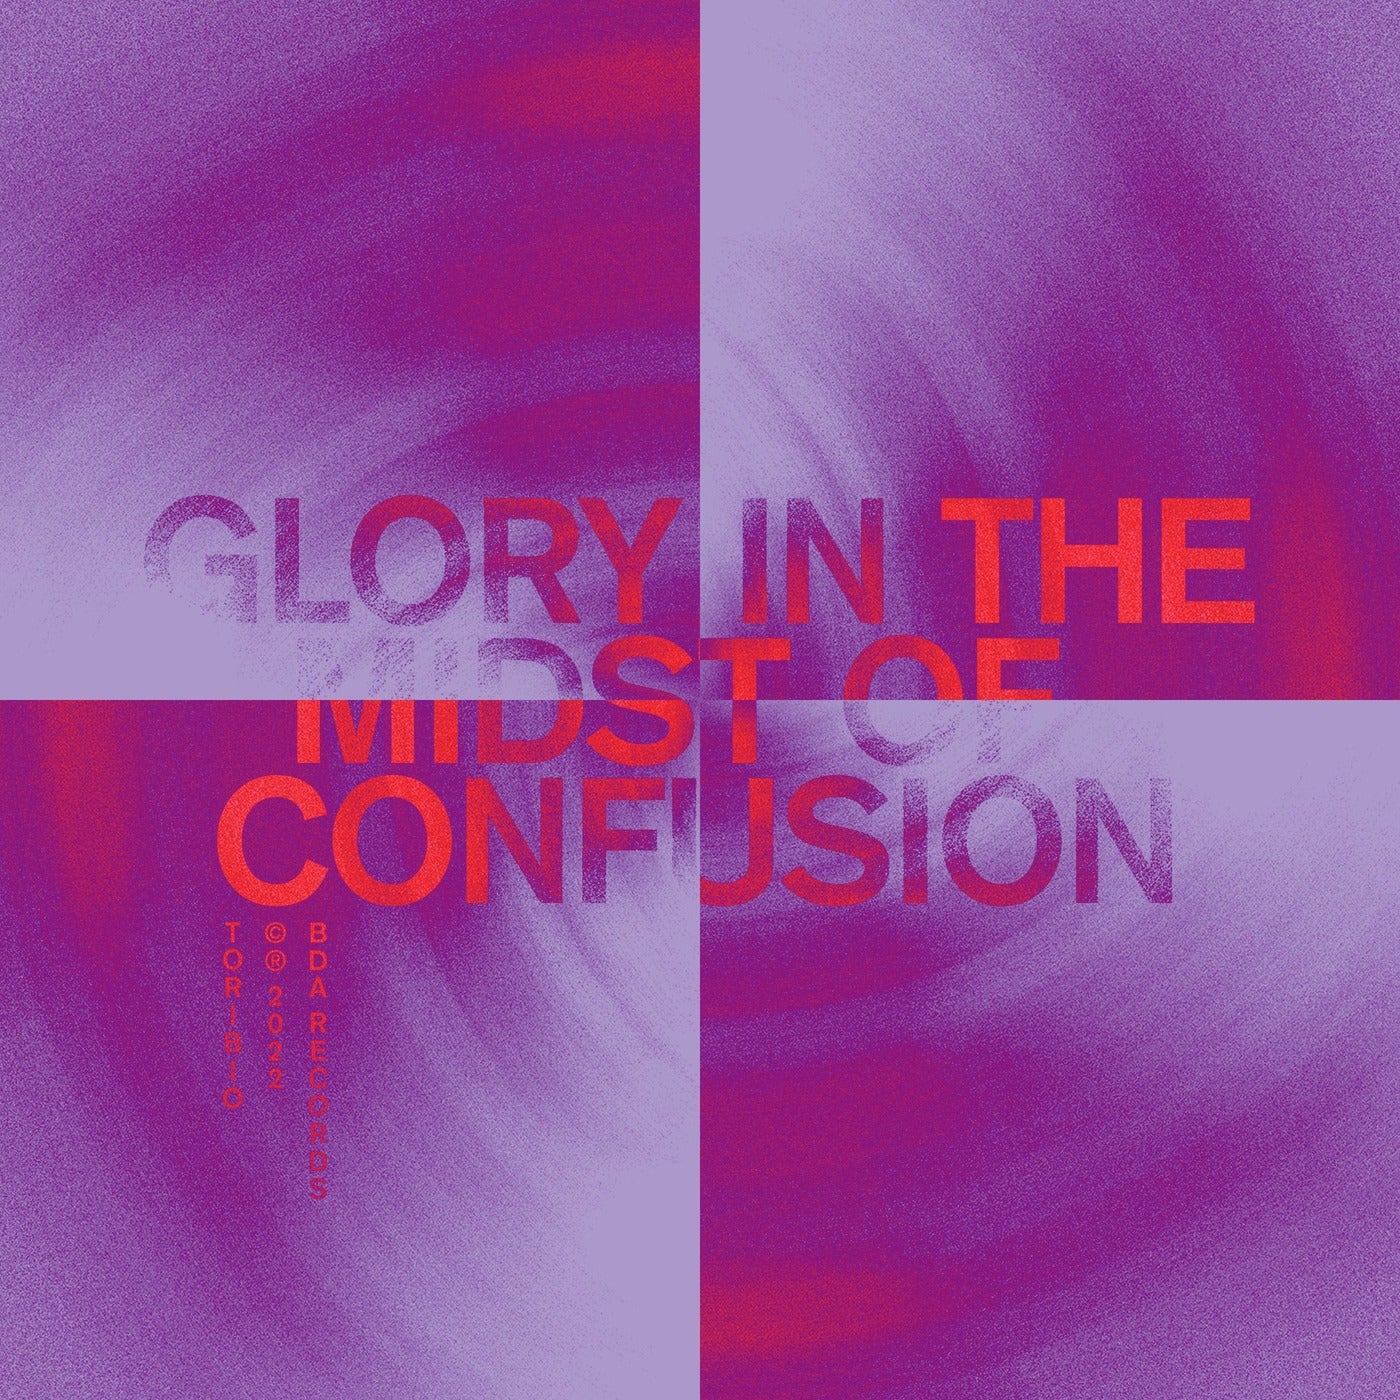 Glory (In the Midst Of Confusion)